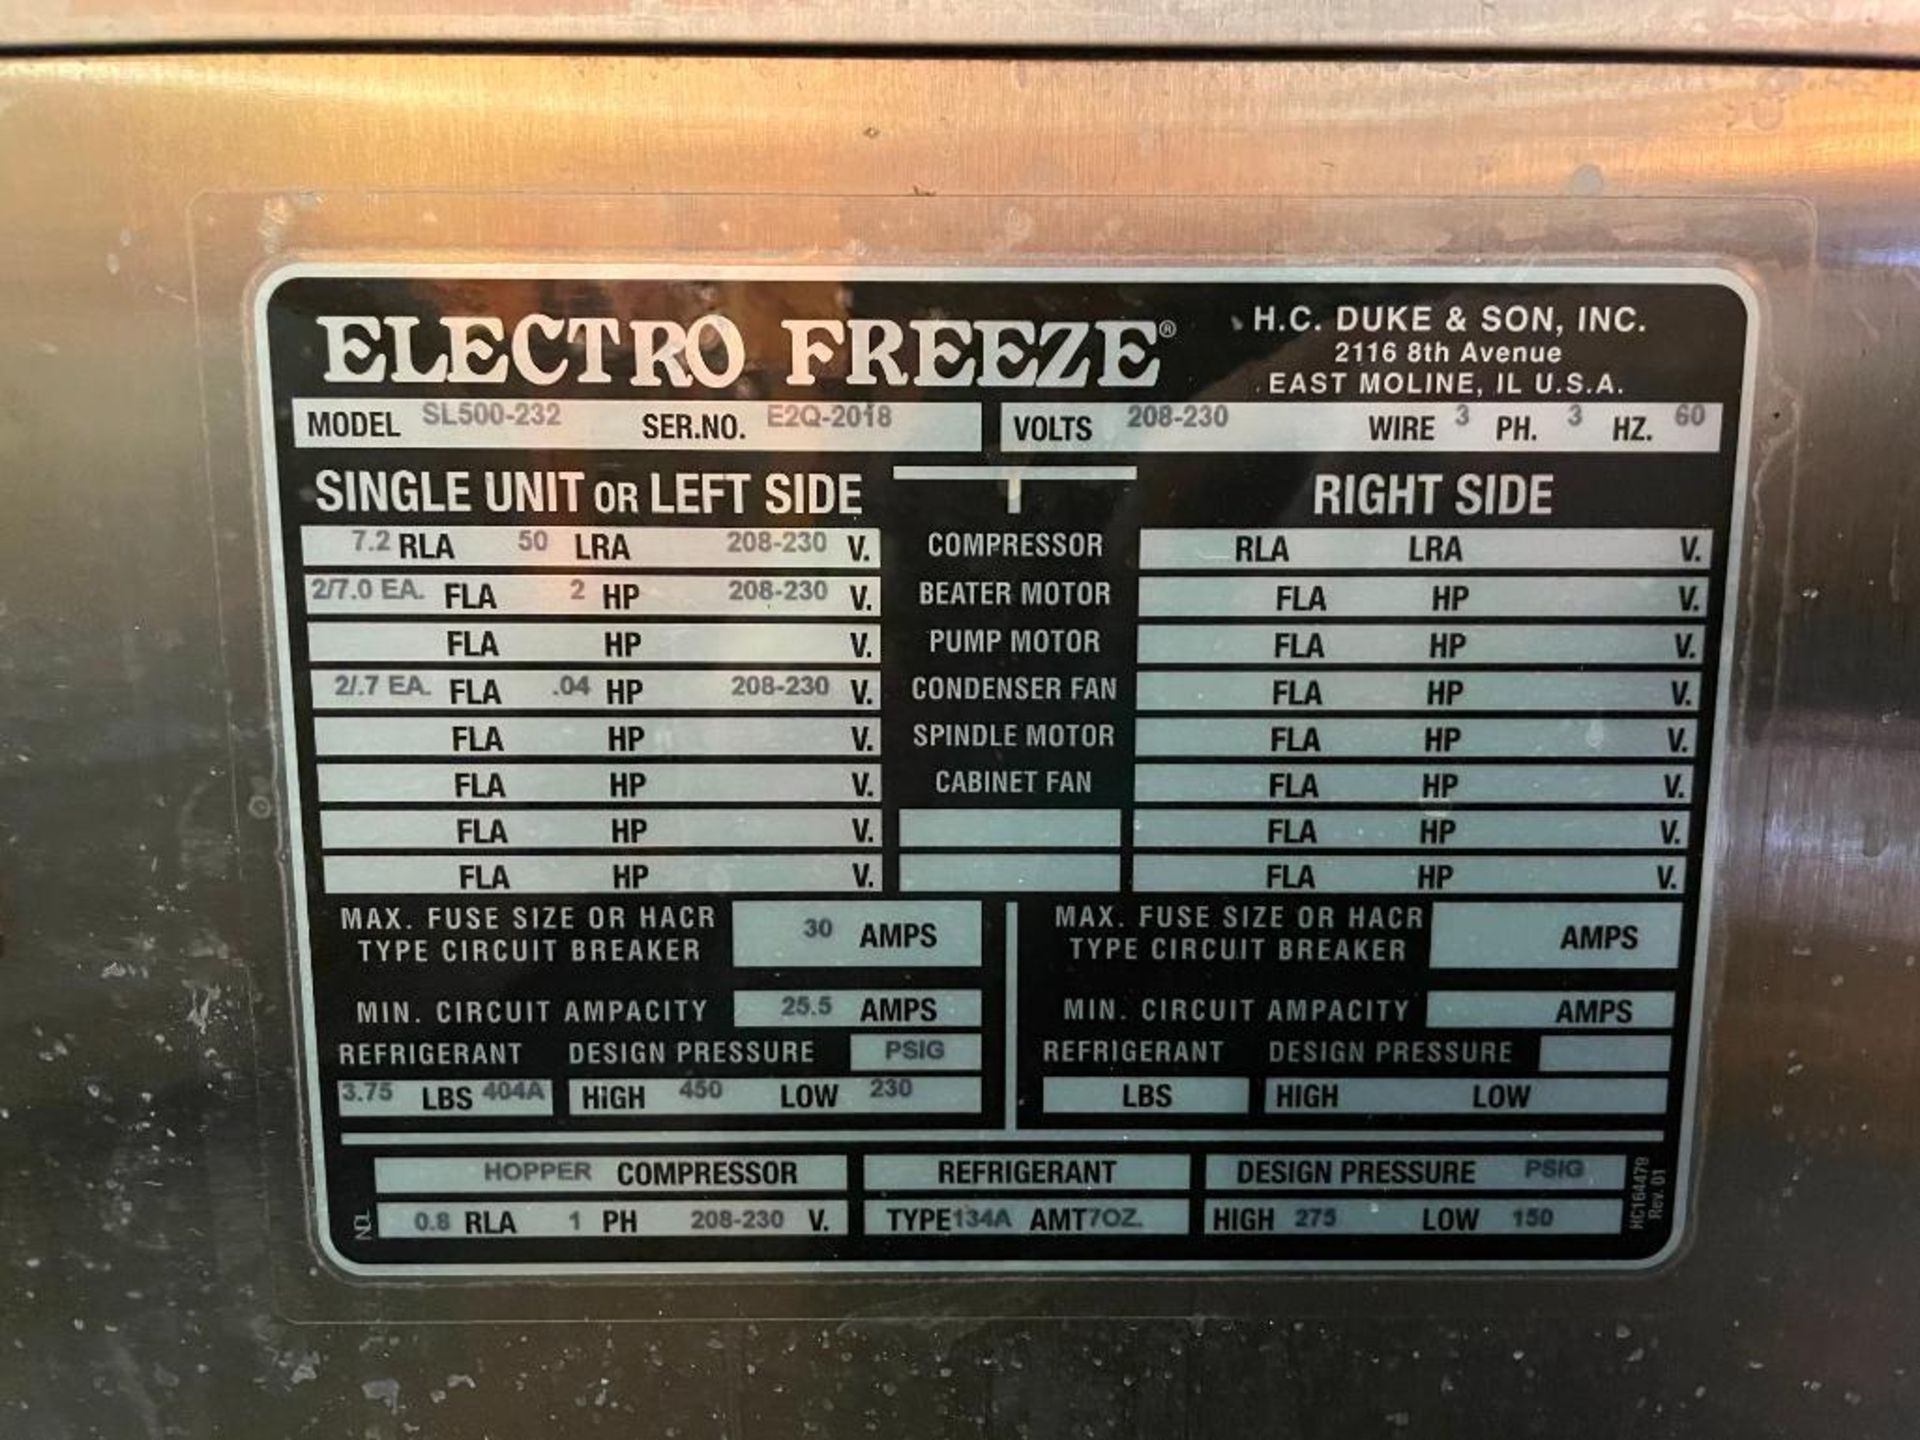 DESCRIPTION SOFT SERVE ICE CREAM MACHINE WITH 2-FLAVOR OPTIONS AND A SWIRL OPTION BRAND/MODEL ELECTR - Image 5 of 5